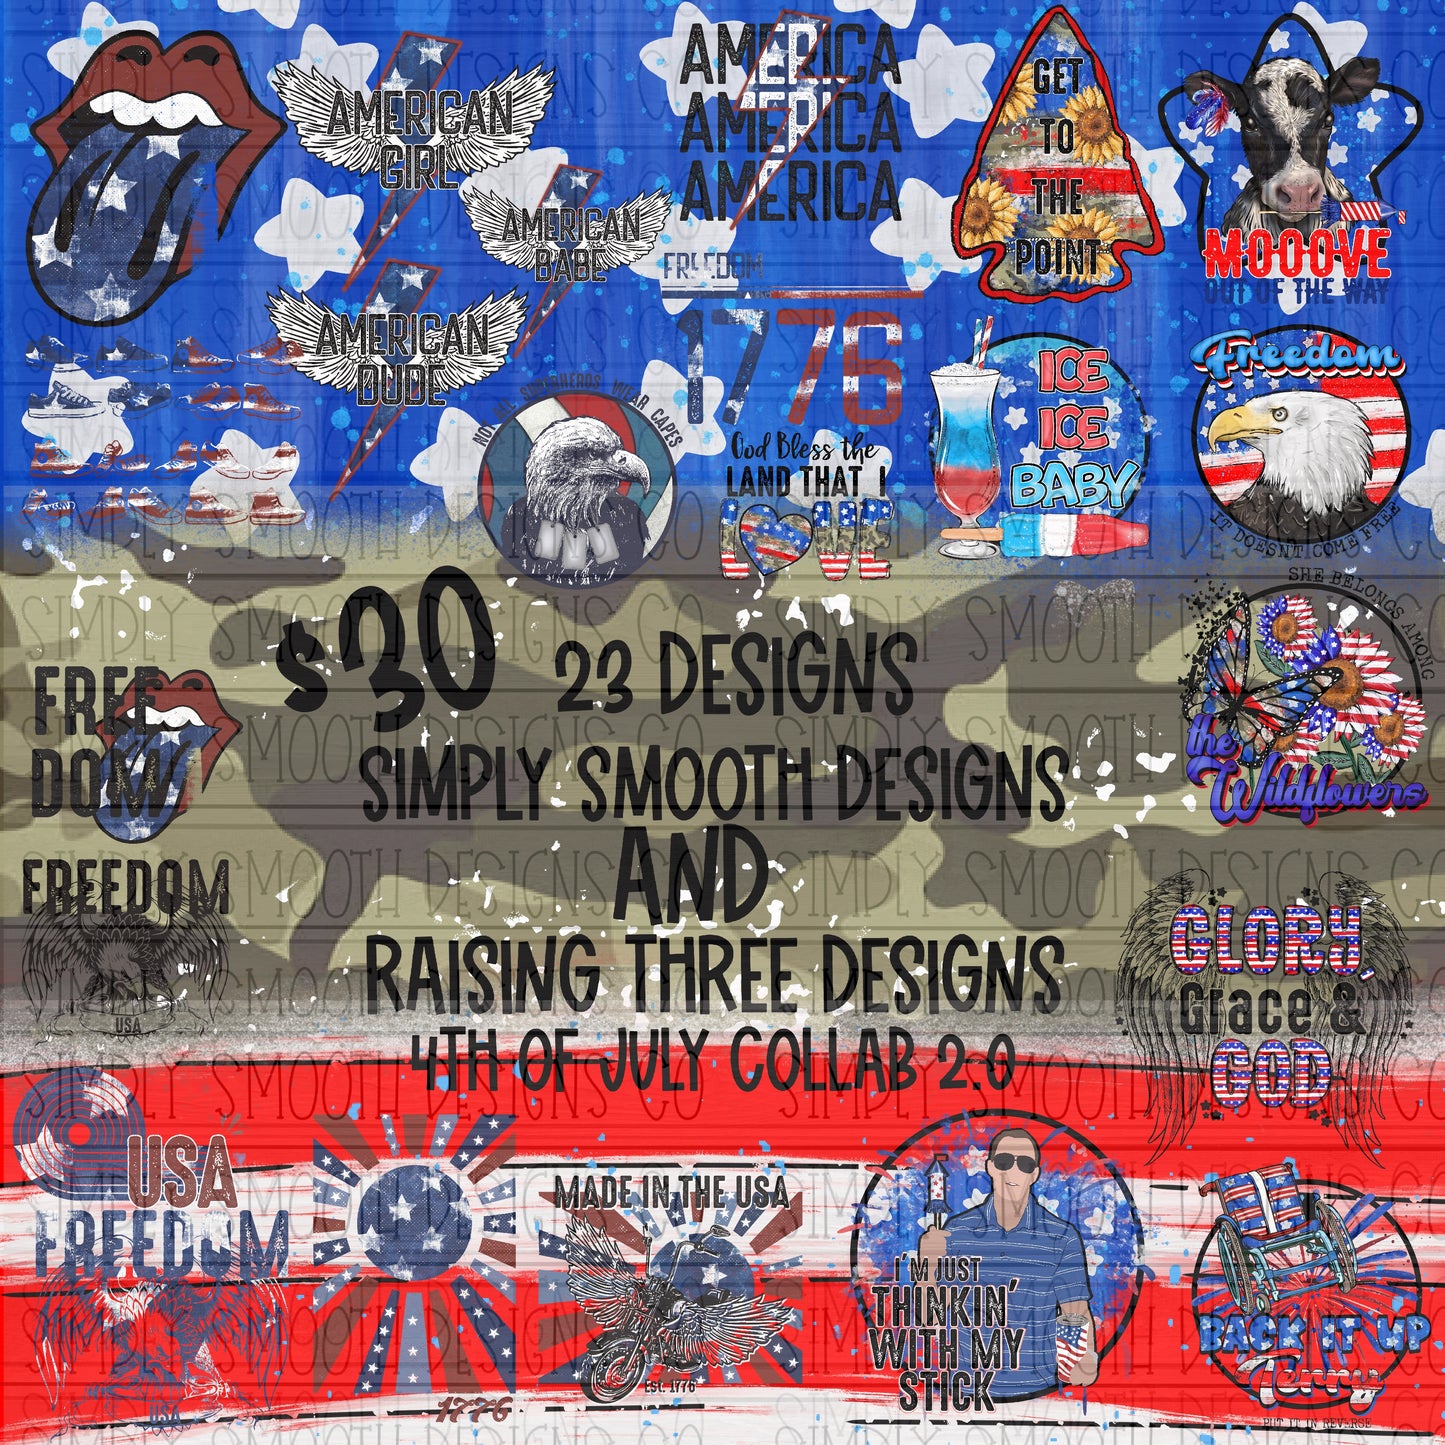 4th of July Collab 2.0